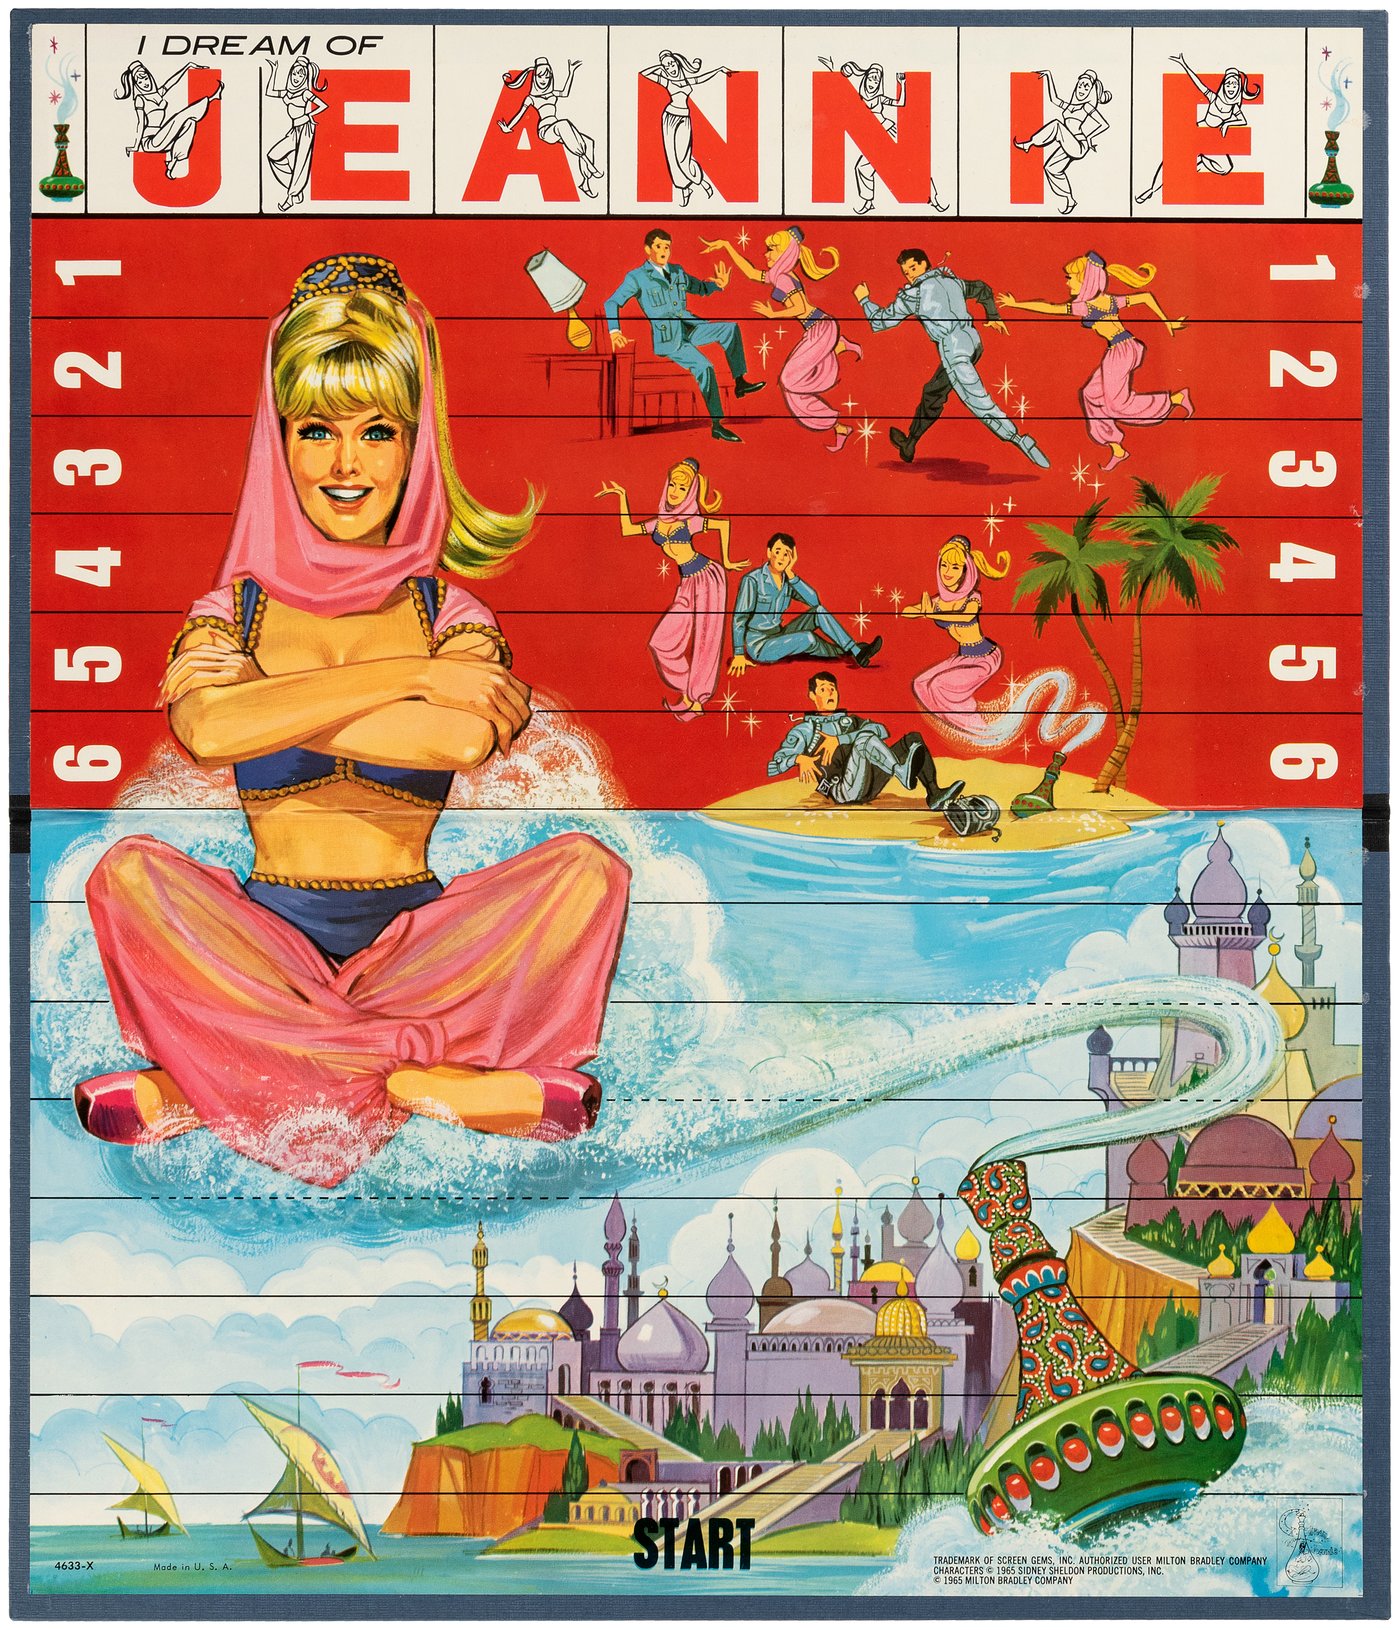 Hake's  "I DREAM OF JEANNIE GAME" IN UNUSED CONDITION.